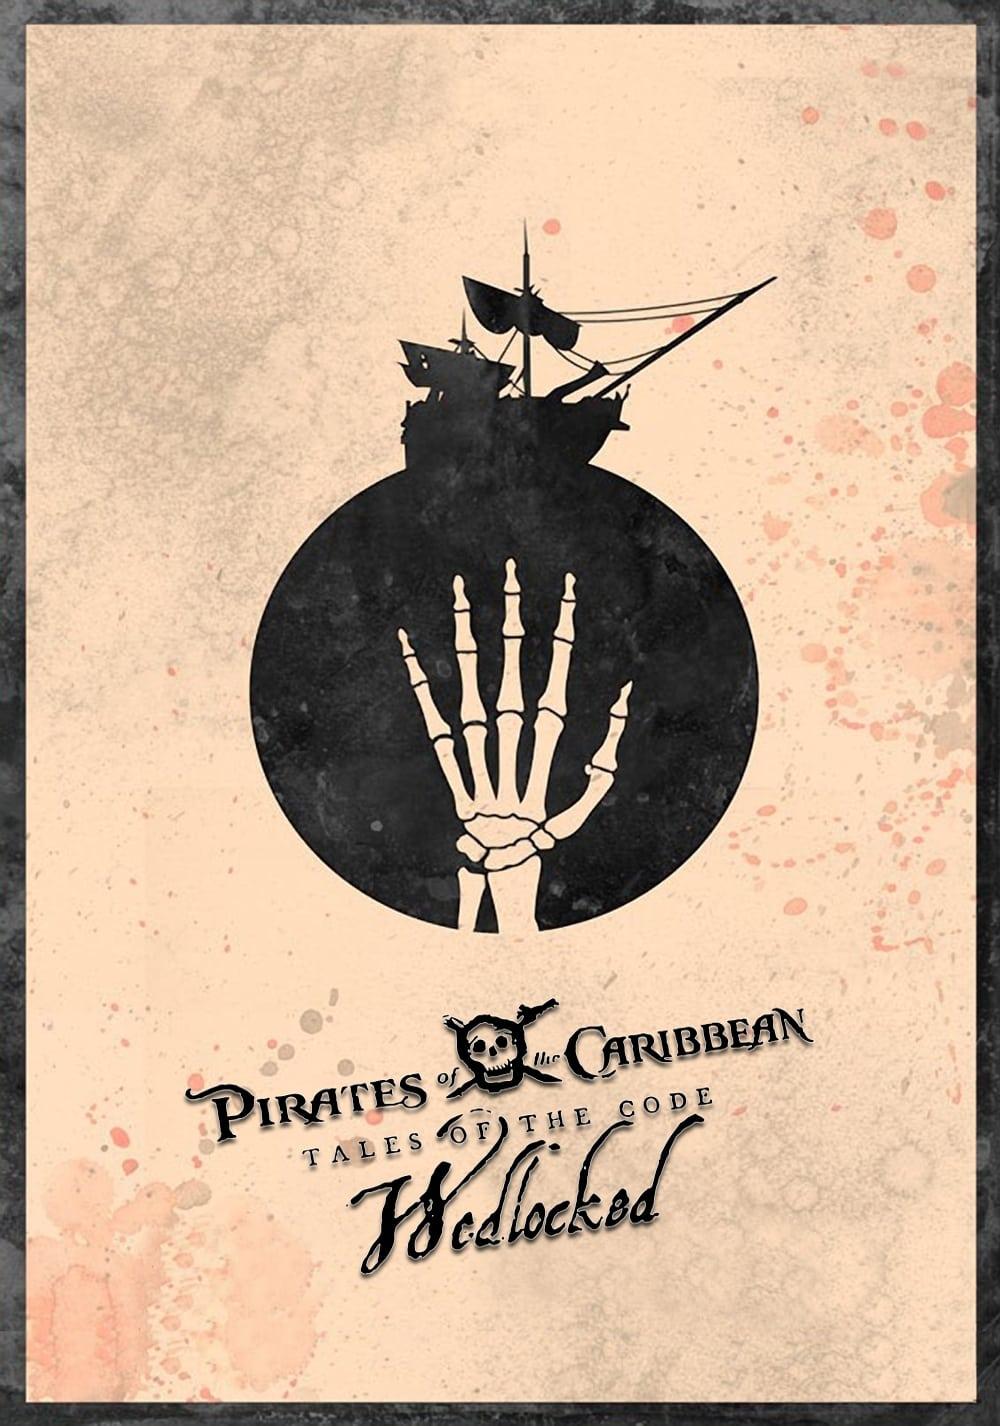 Pirates of the Caribbean: Tales of the Code: Wedlocked poster